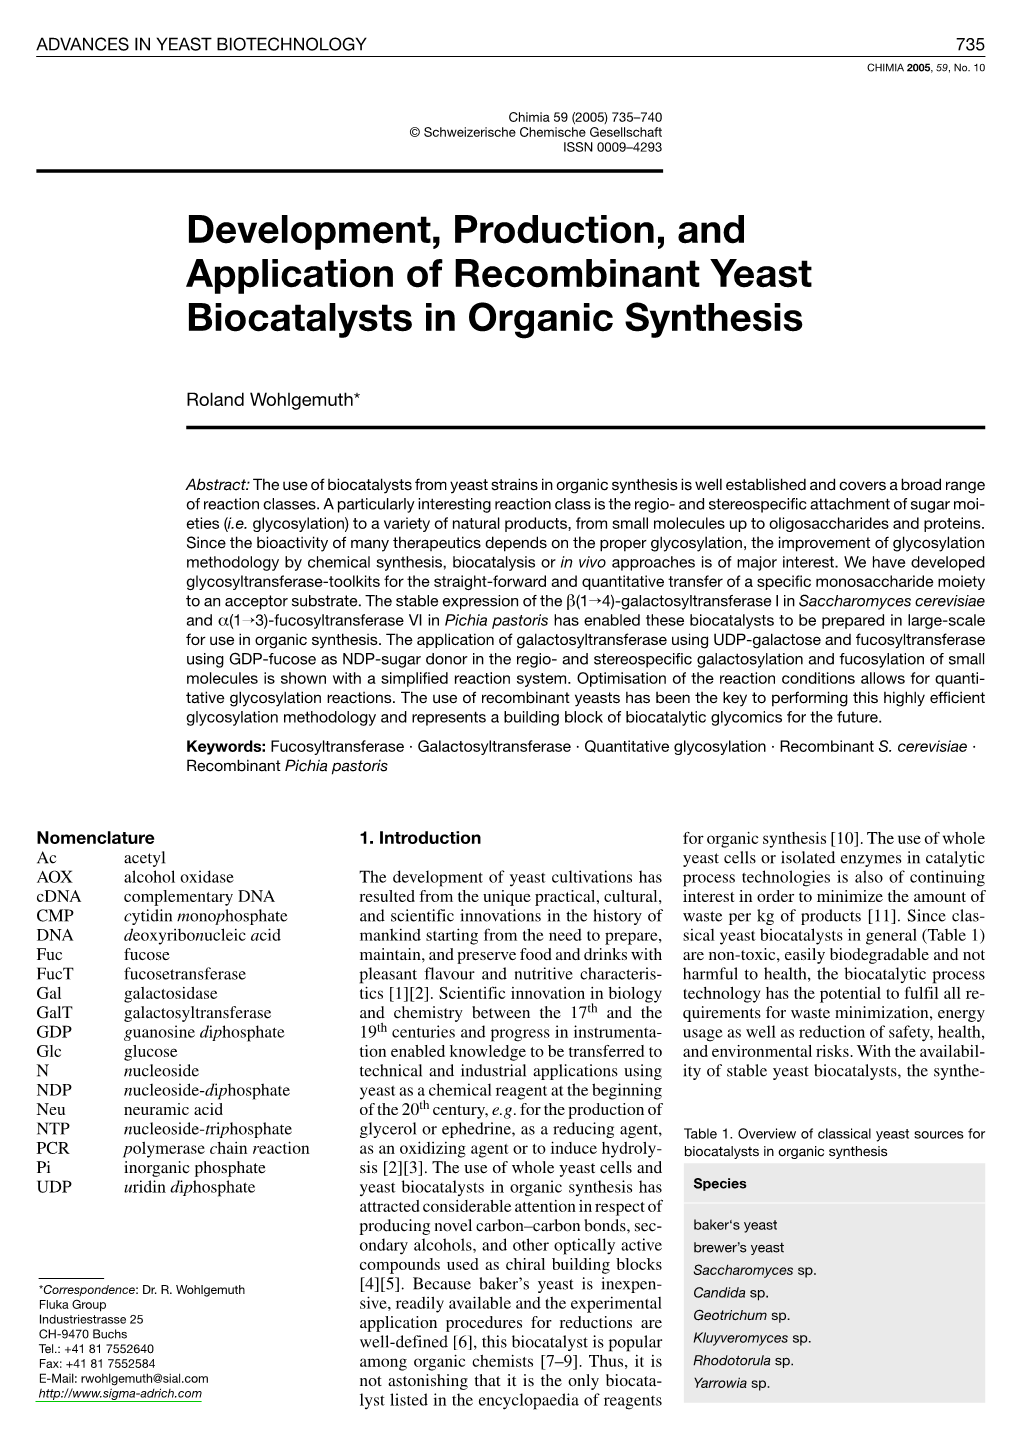 Development, Production, and Application of Recombinant Yeast Biocatalysts in Organic Synthesis